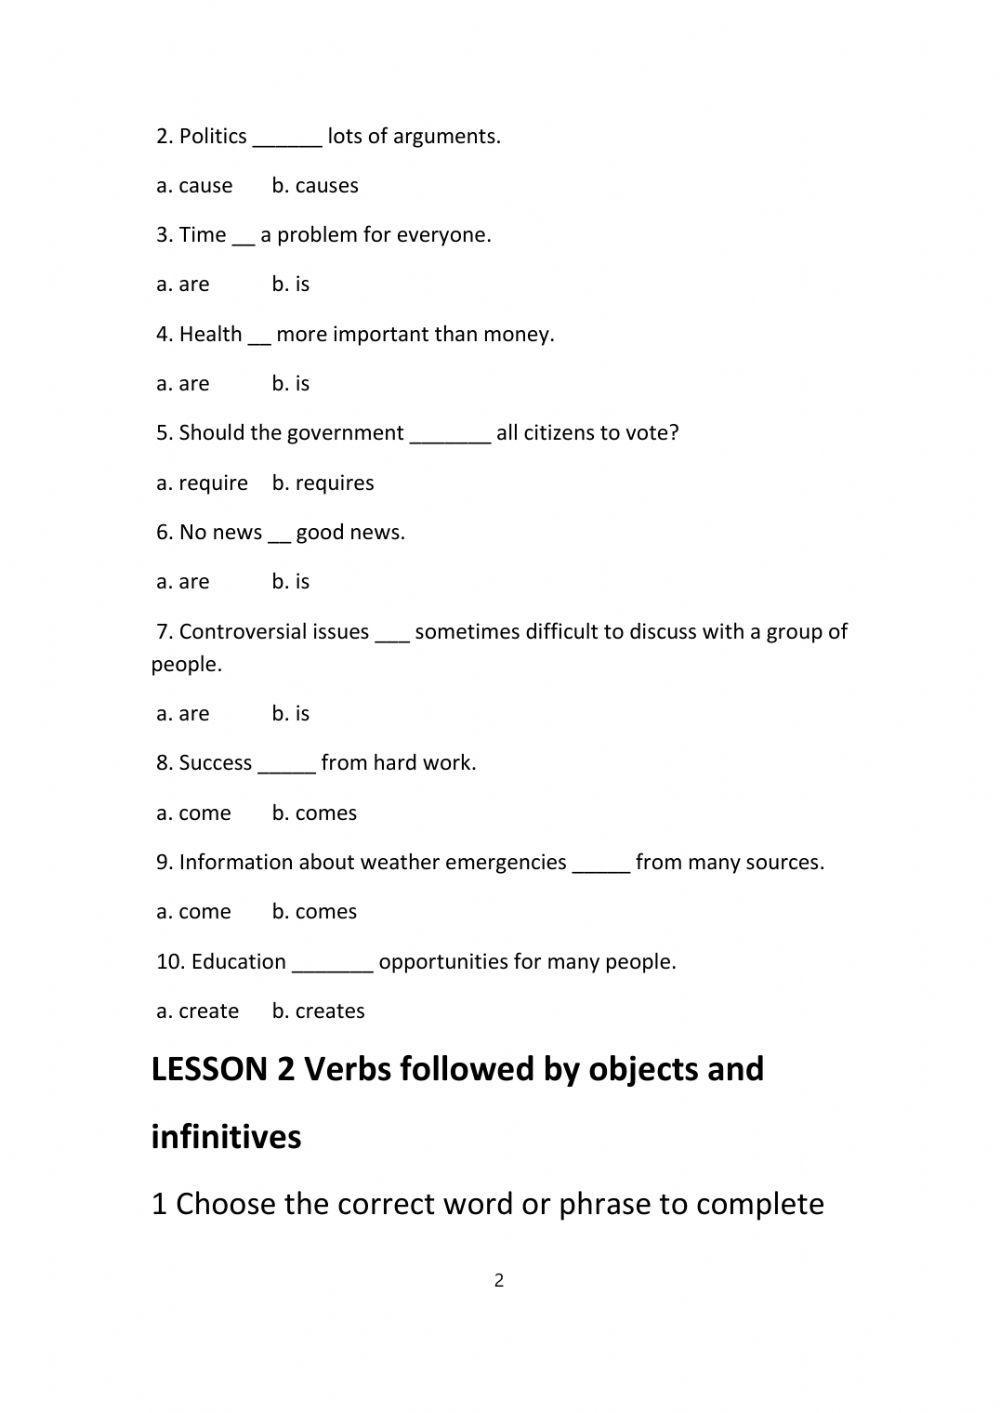 Abstract nouns - Verbs with-without object before infinitive